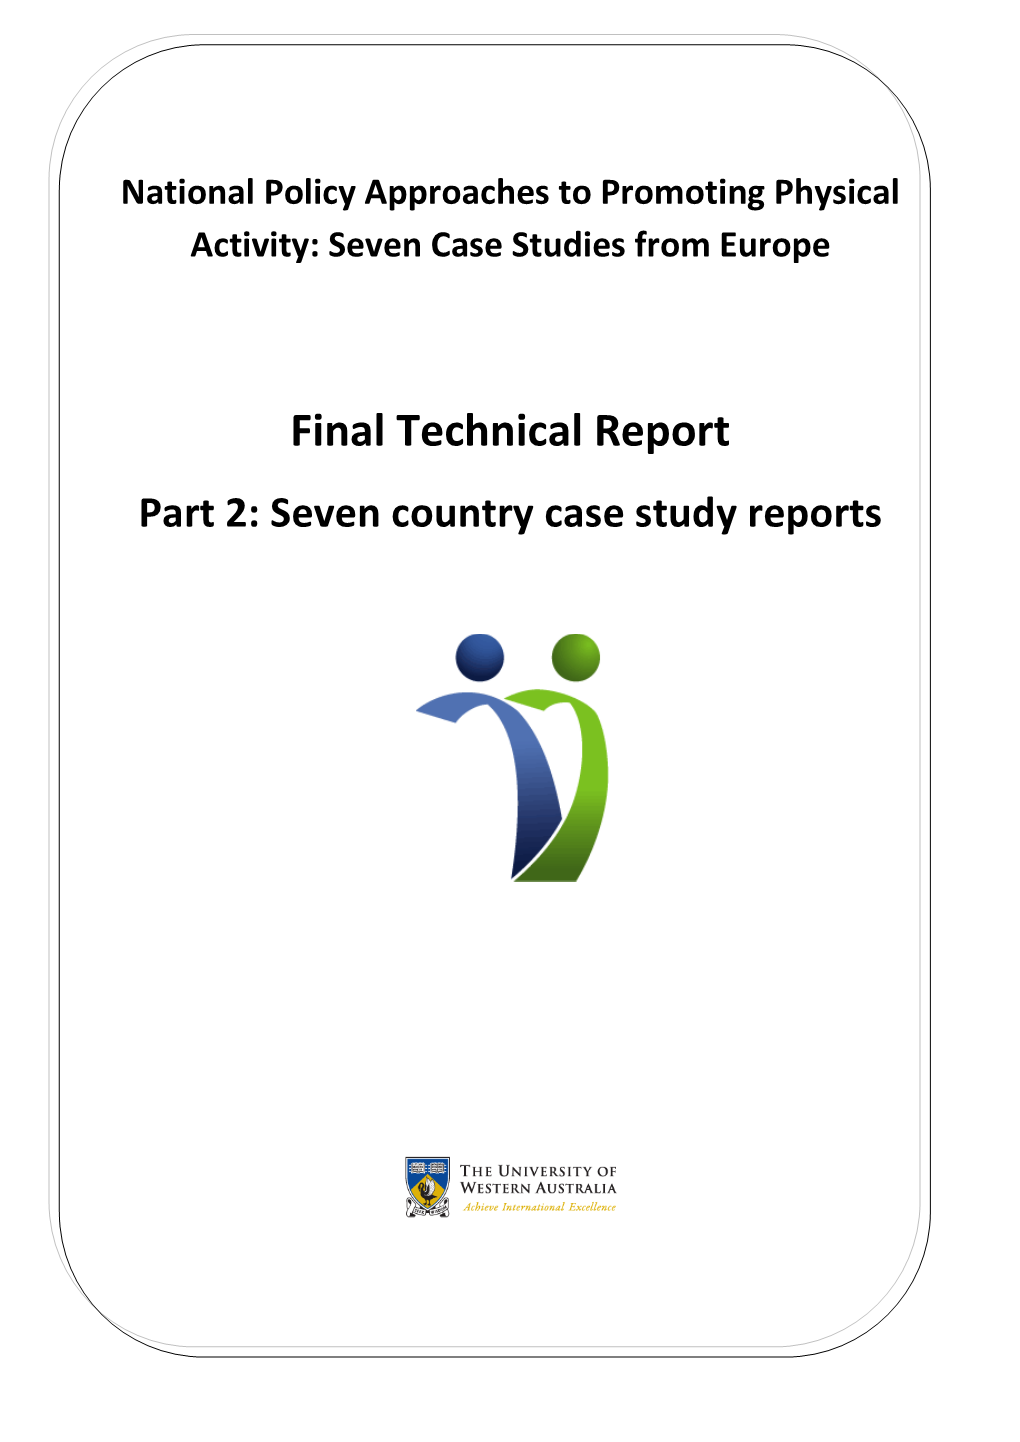 Final Technical Report Part 2: Seven Country Case Study Reports